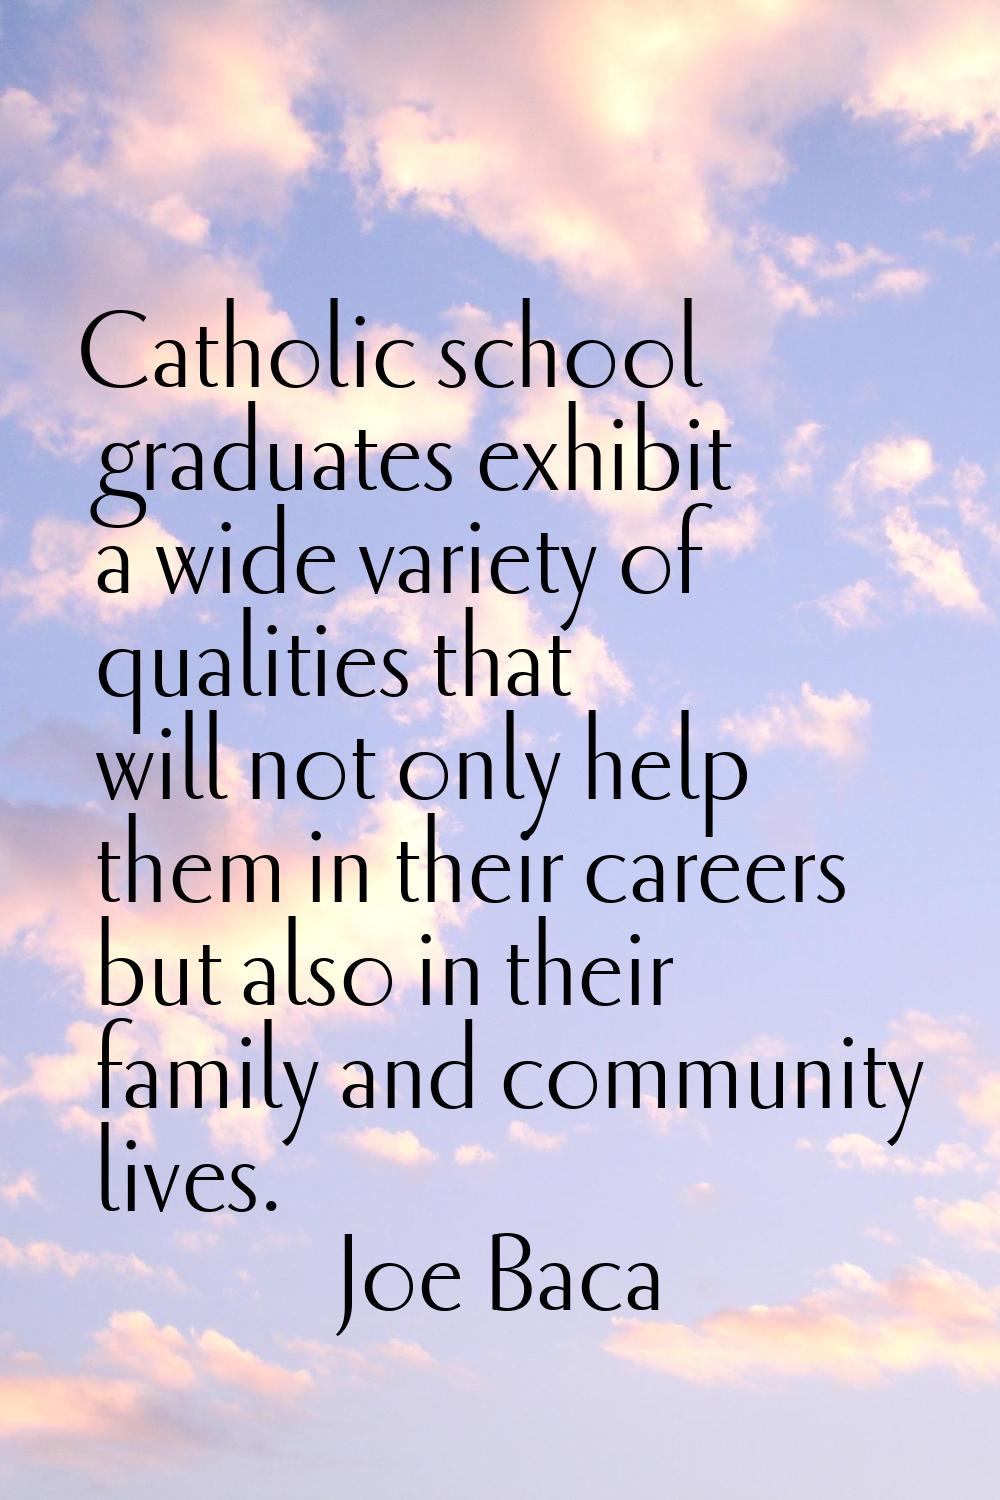 Catholic school graduates exhibit a wide variety of qualities that will not only help them in their